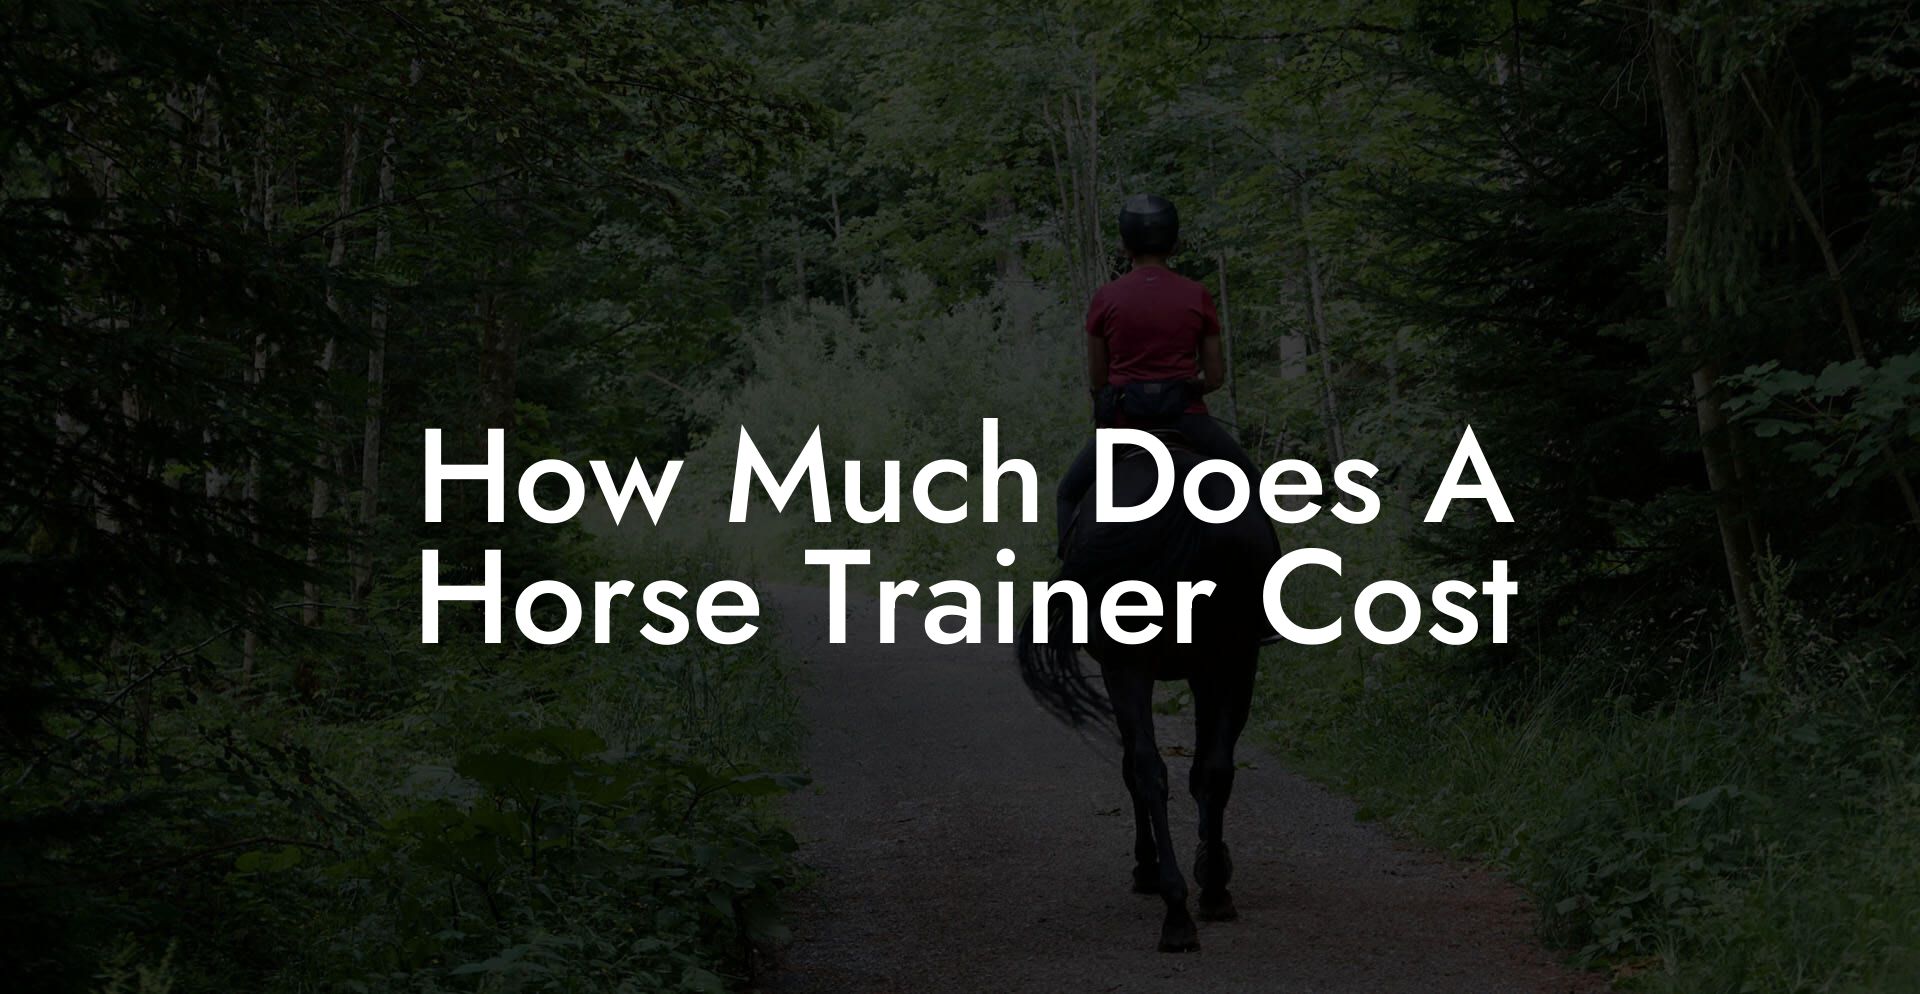 How Much Does A Horse Trainer Cost